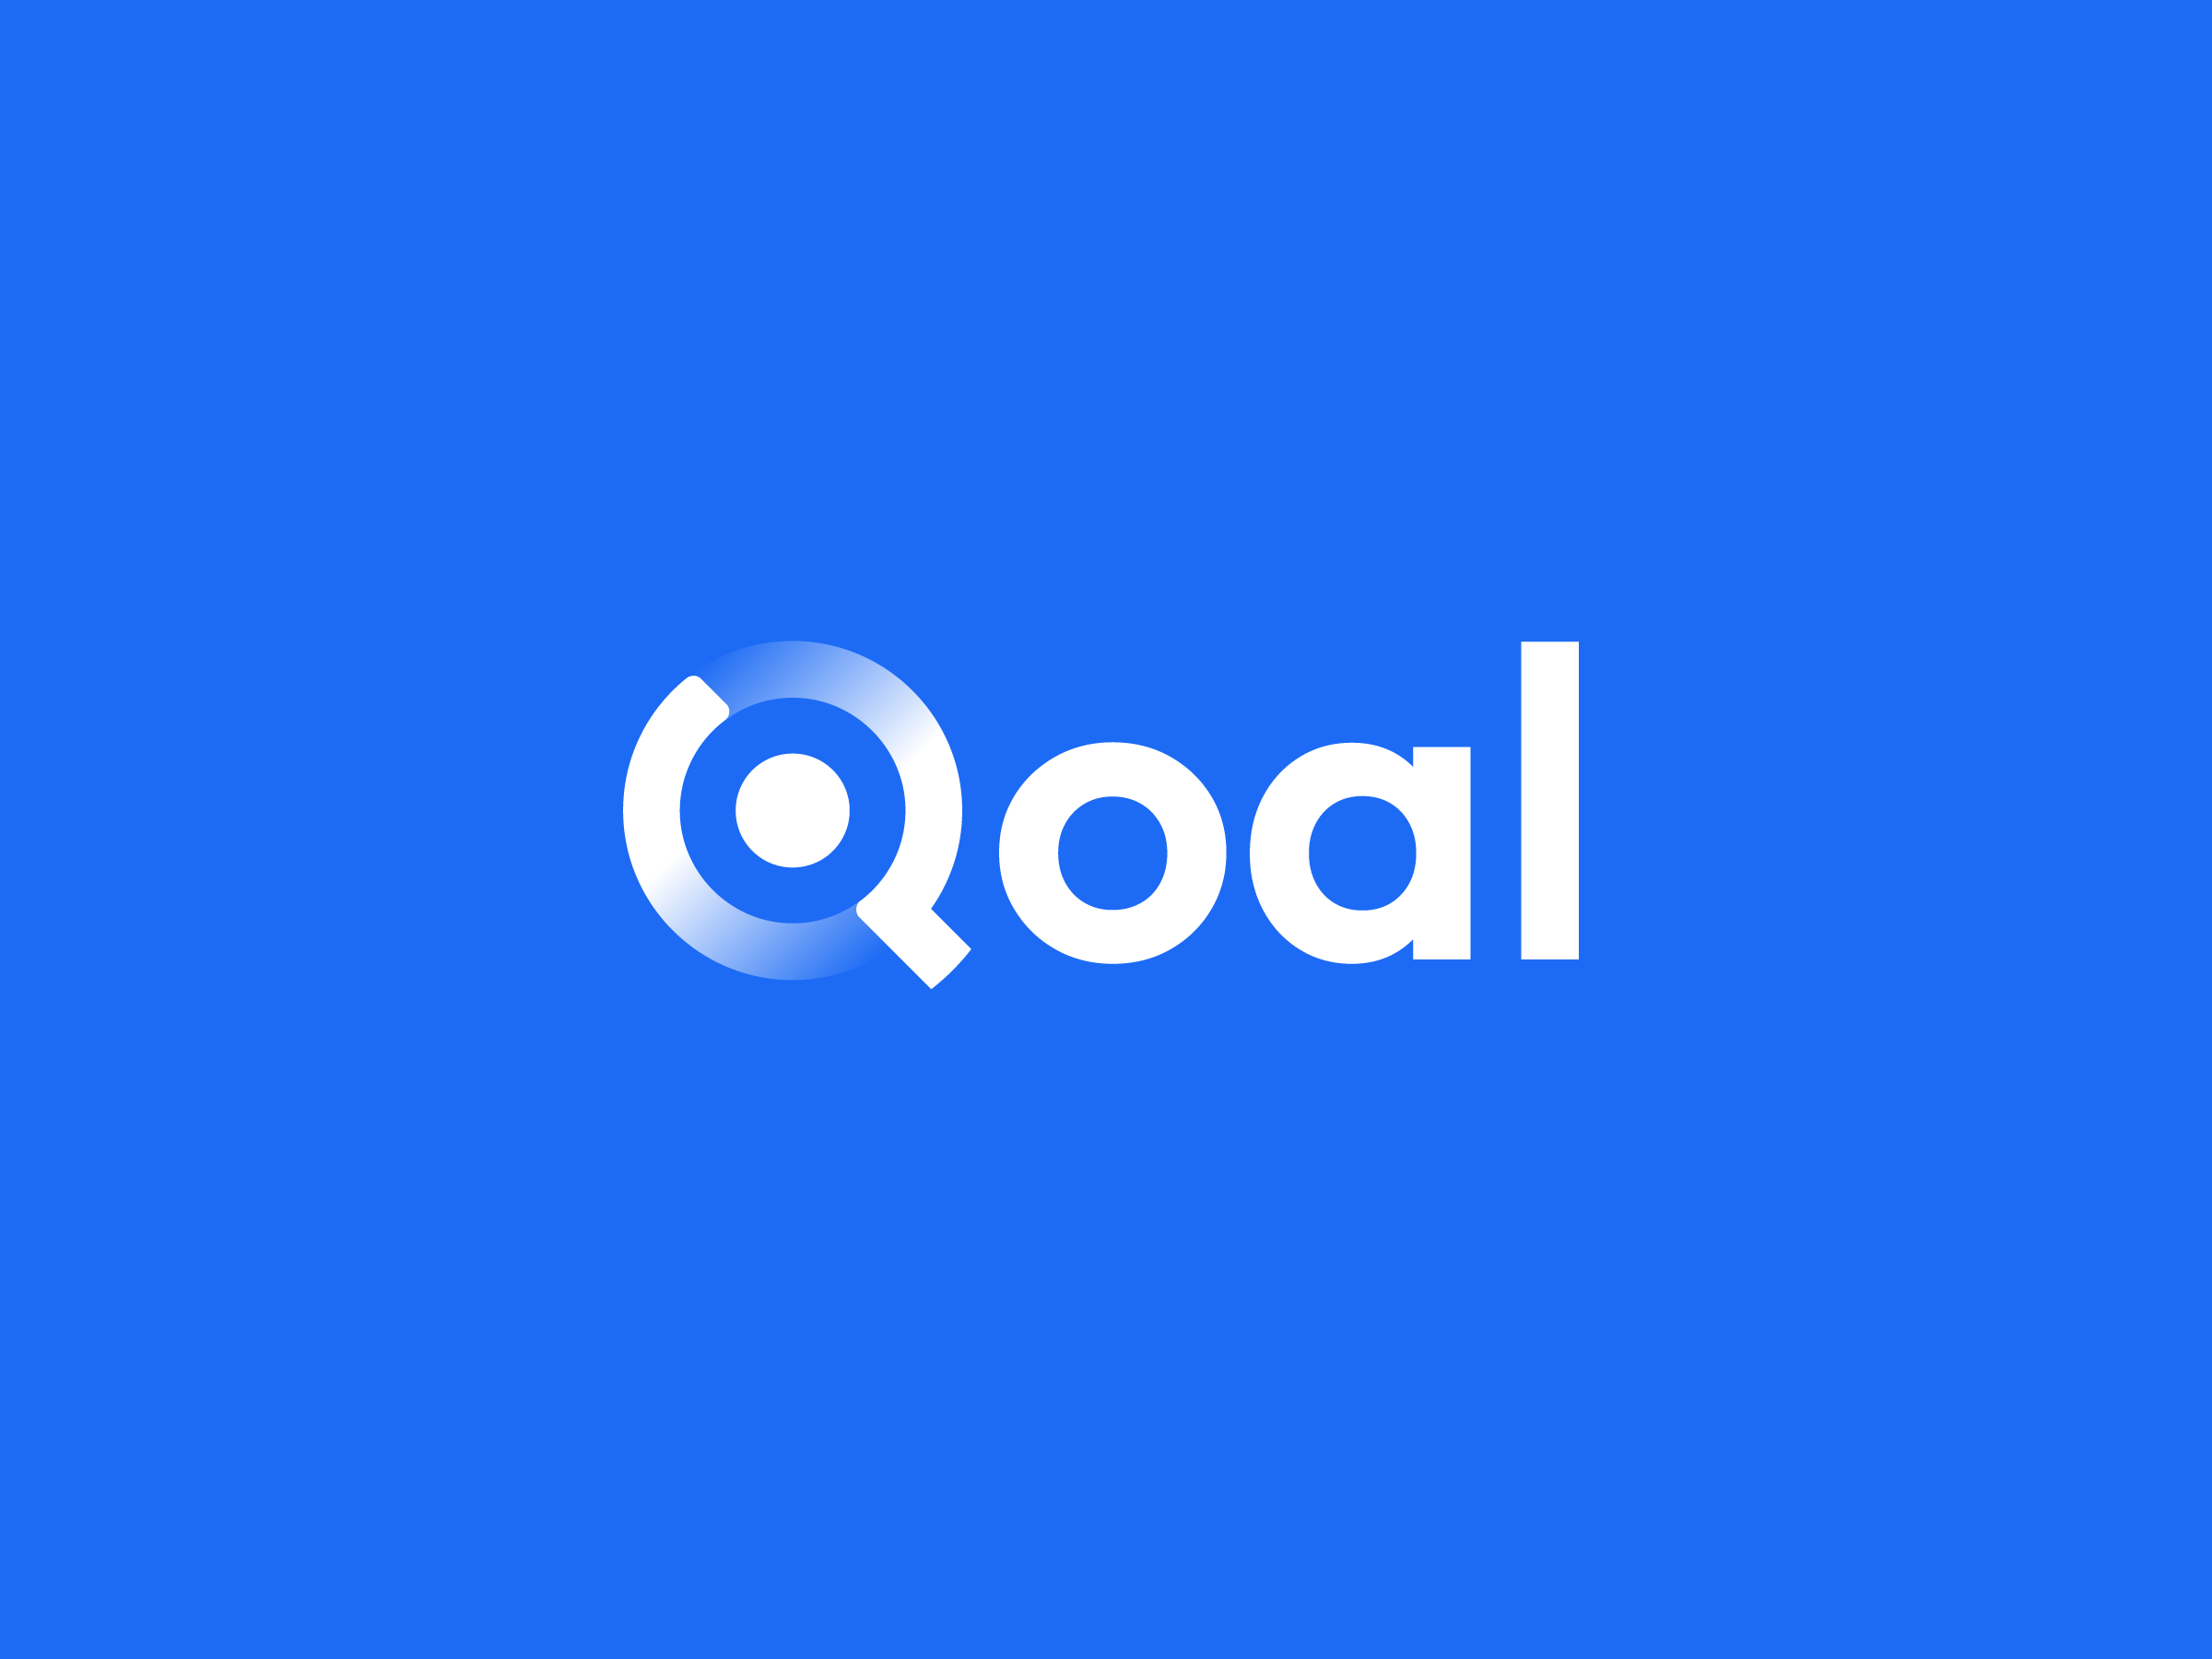 Qoal – logo for cryptocurrency exchange